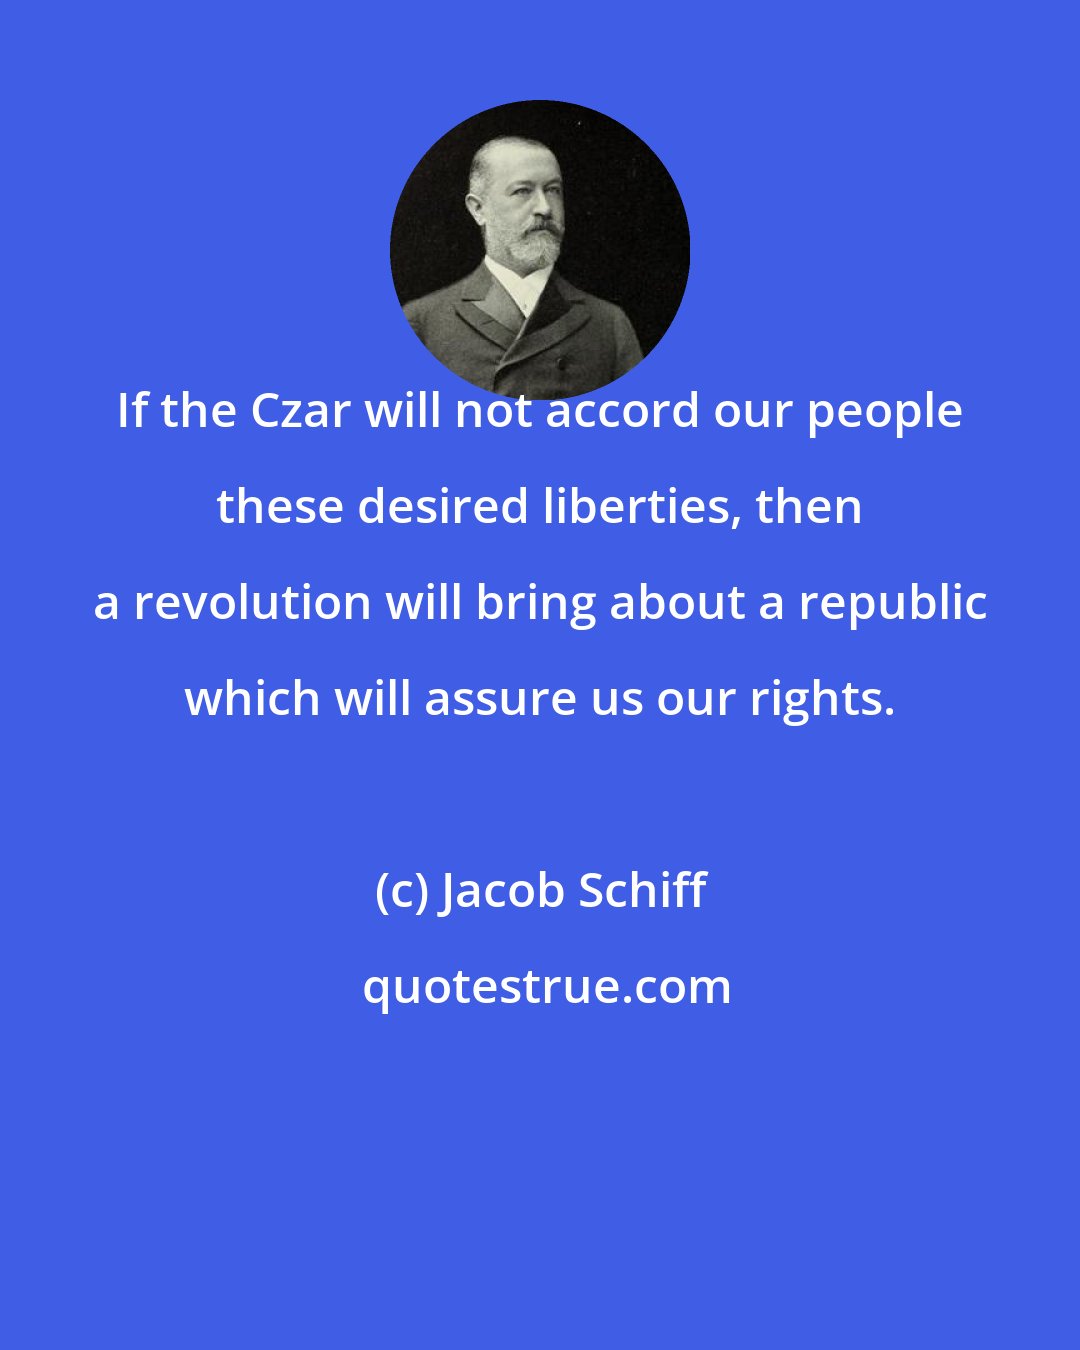 Jacob Schiff: If the Czar will not accord our people these desired liberties, then a revolution will bring about a republic which will assure us our rights.